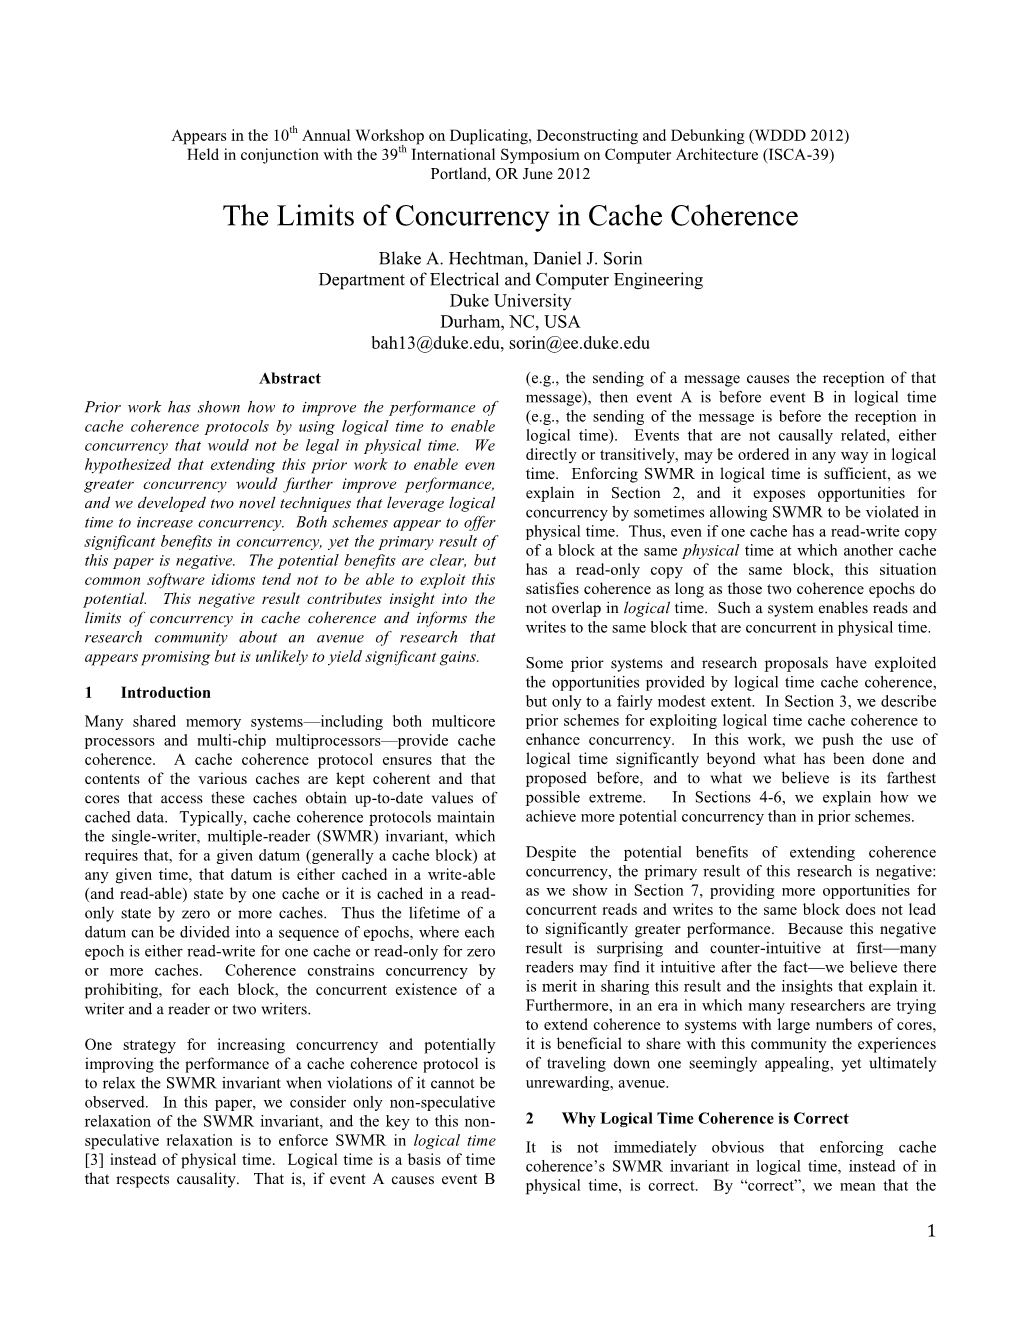 The Limits of Concurrency in Cache Coherence Blake A